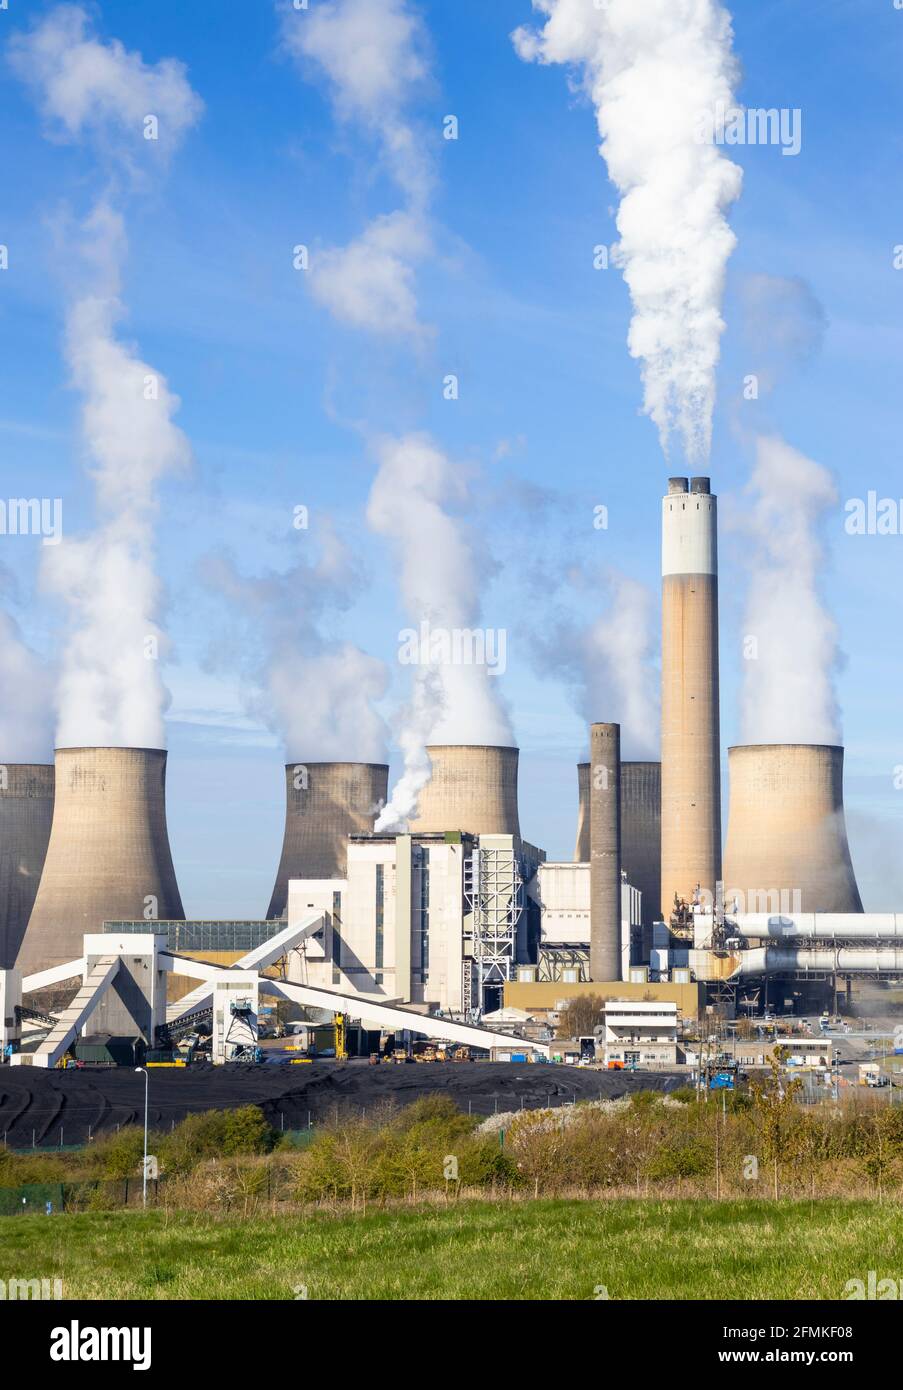 Ratcliffe-on-Soar power station with steam from the coal power station cooling towers Ratcliffe on soar Nottinghamshire England UK GB Europe Stock Photo